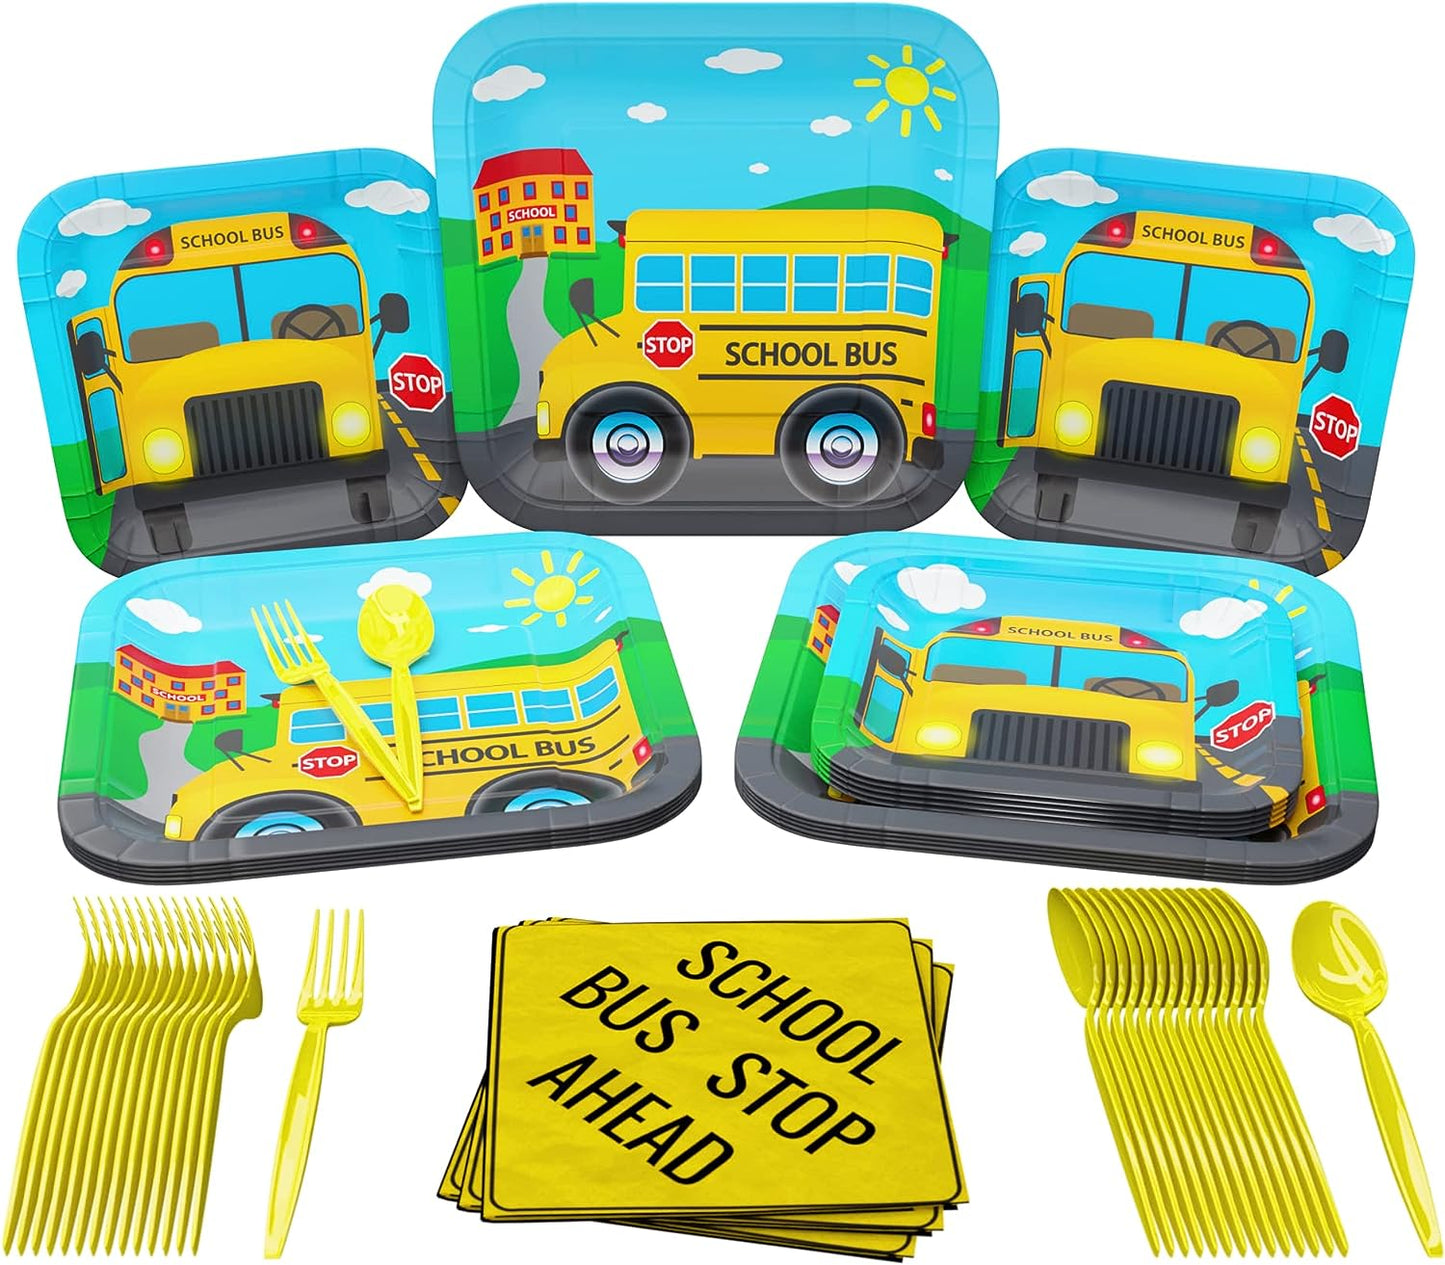 9-inch paper dinner plates, 7-inch paper dessert plates, paper lunch napkins, yellow plastic forks, and yellow plastic spoons